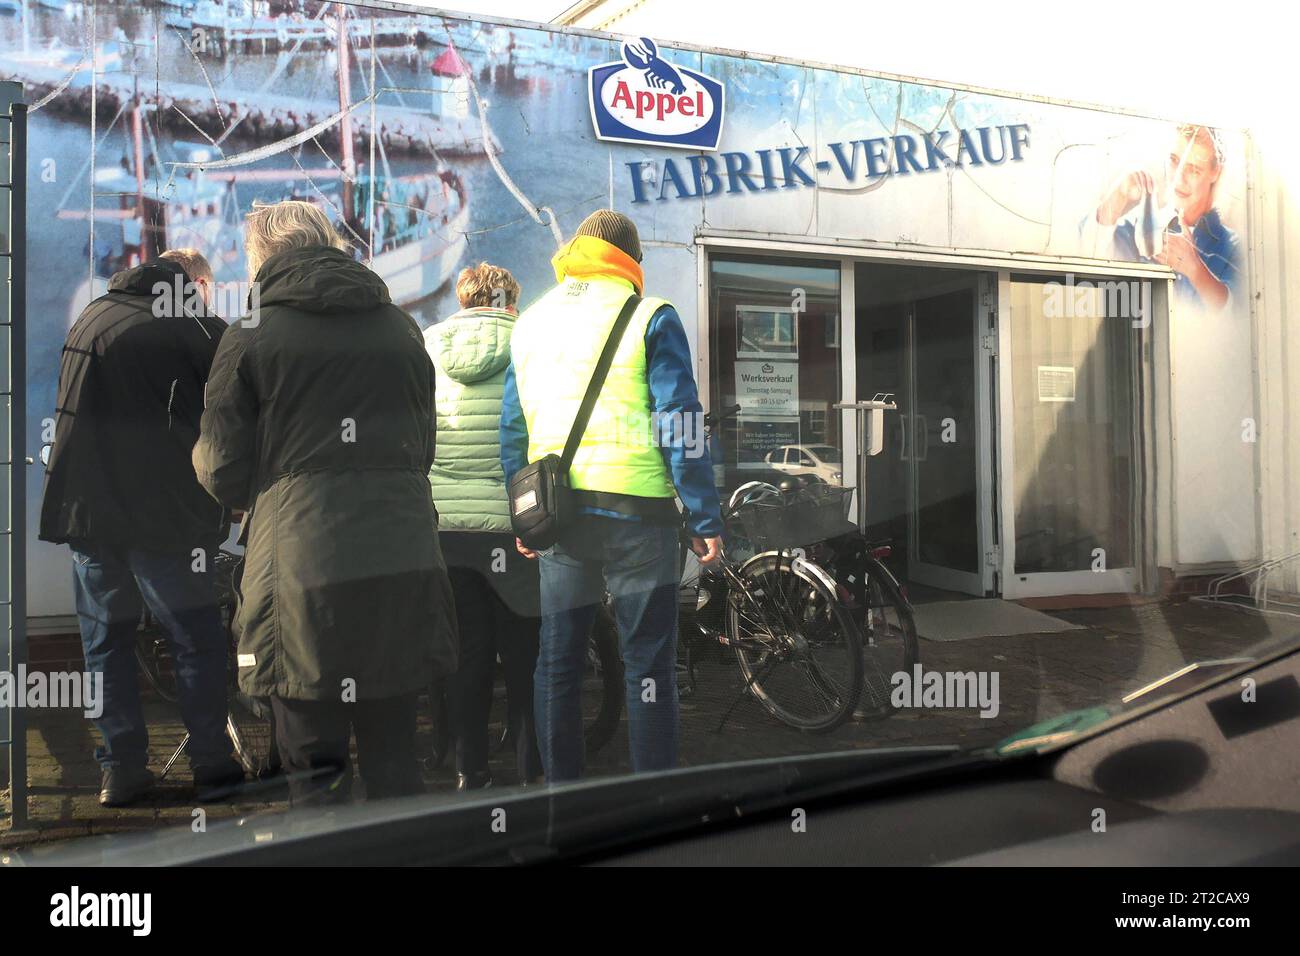 RECORD DATE NOT STATED Appel Fabrik Verkauf - gesehen am 18.10.2023 am Fischmarkt in Cuxhaven *** Appel factory sale seen on 18 10 2023 at the fish market in Cuxhaven Credit: Imago/Alamy Live News Stock Photo